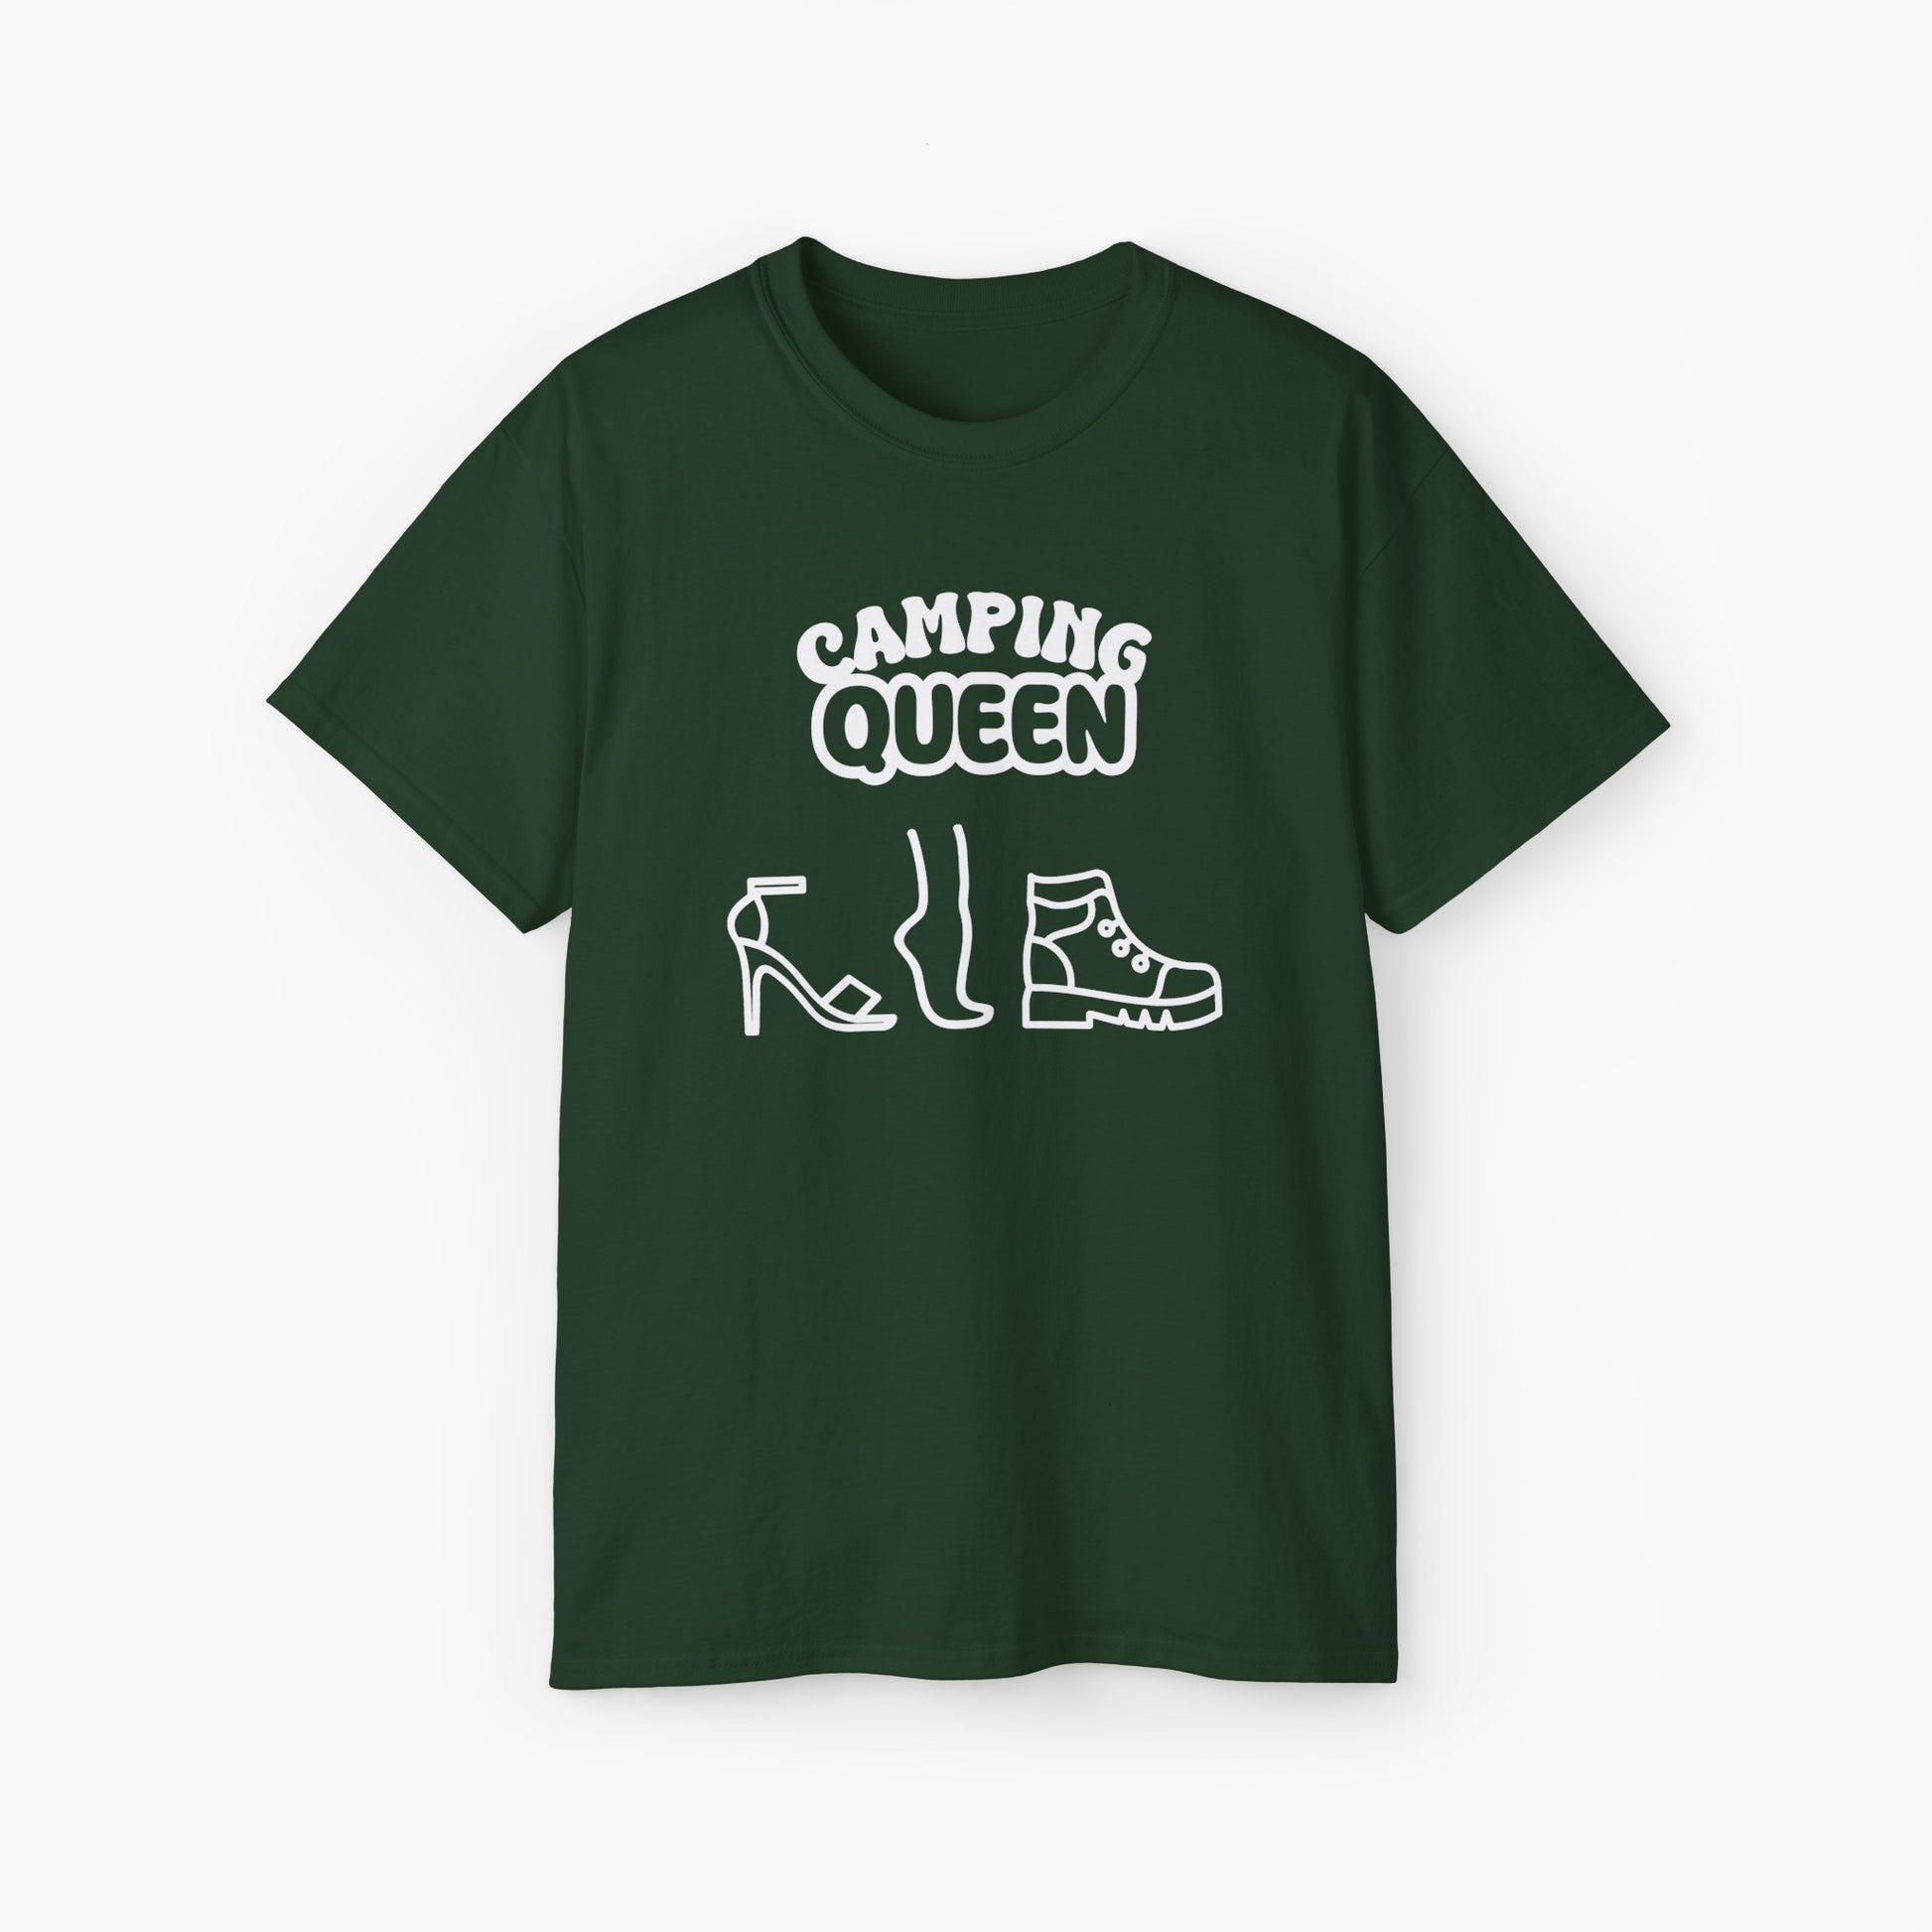 Green t-shirt with 'Camping Queen' text, illustrated with a high heel, a foot, and a boot, on a plain background.